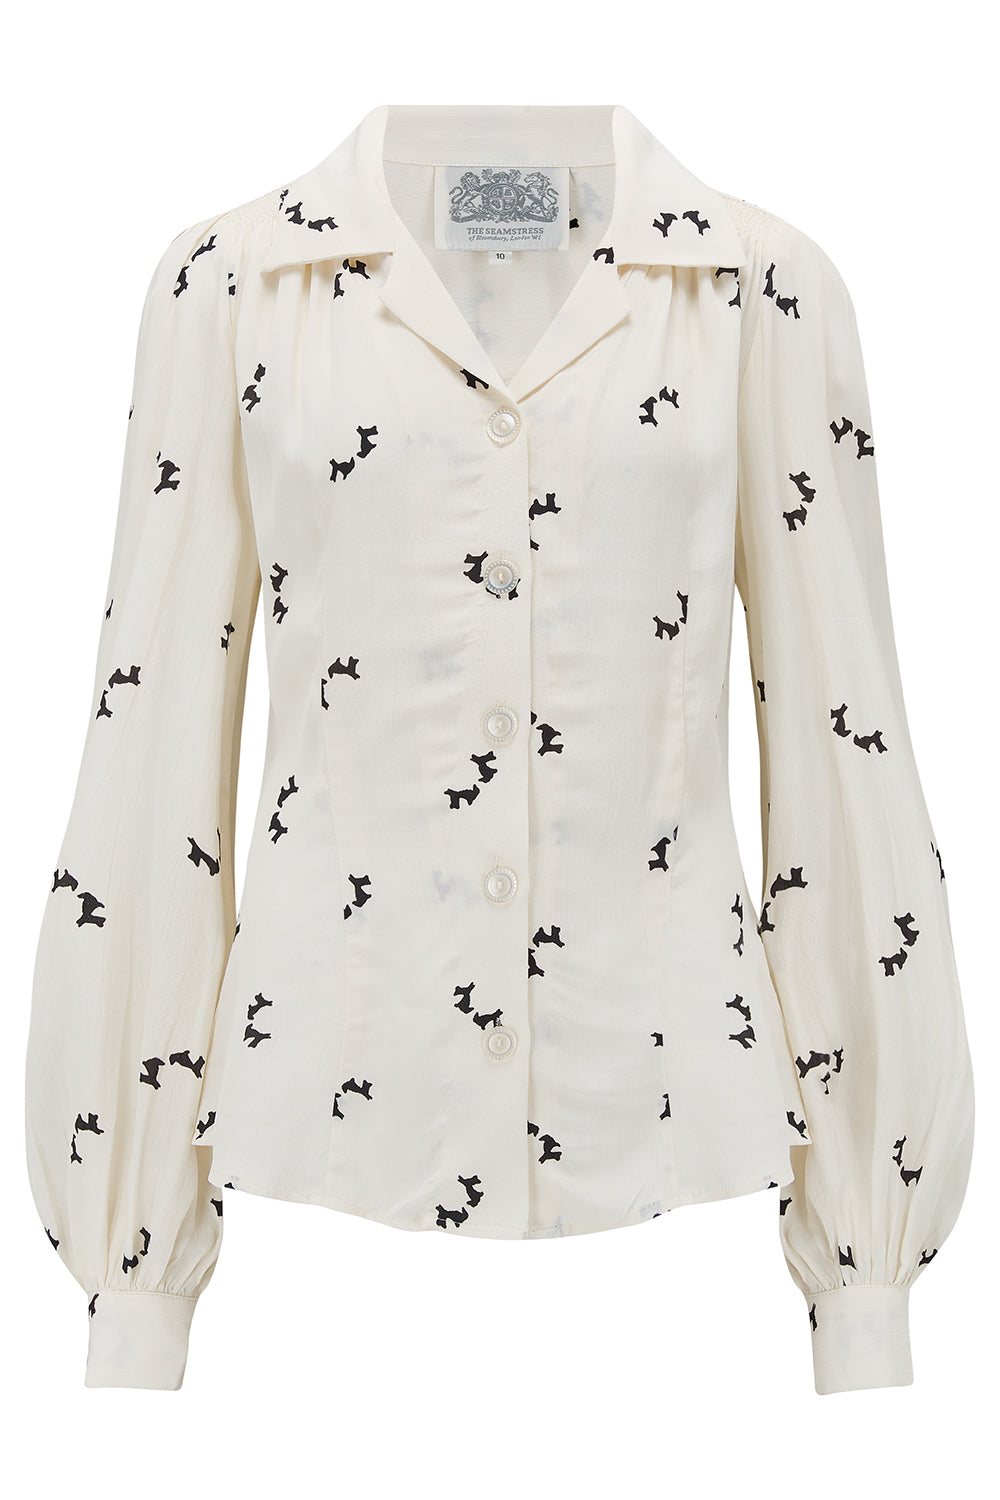 Poppy Long Sleeve Blouse in Cream Doggy, Authentic & Classic 1940s Vintage Style